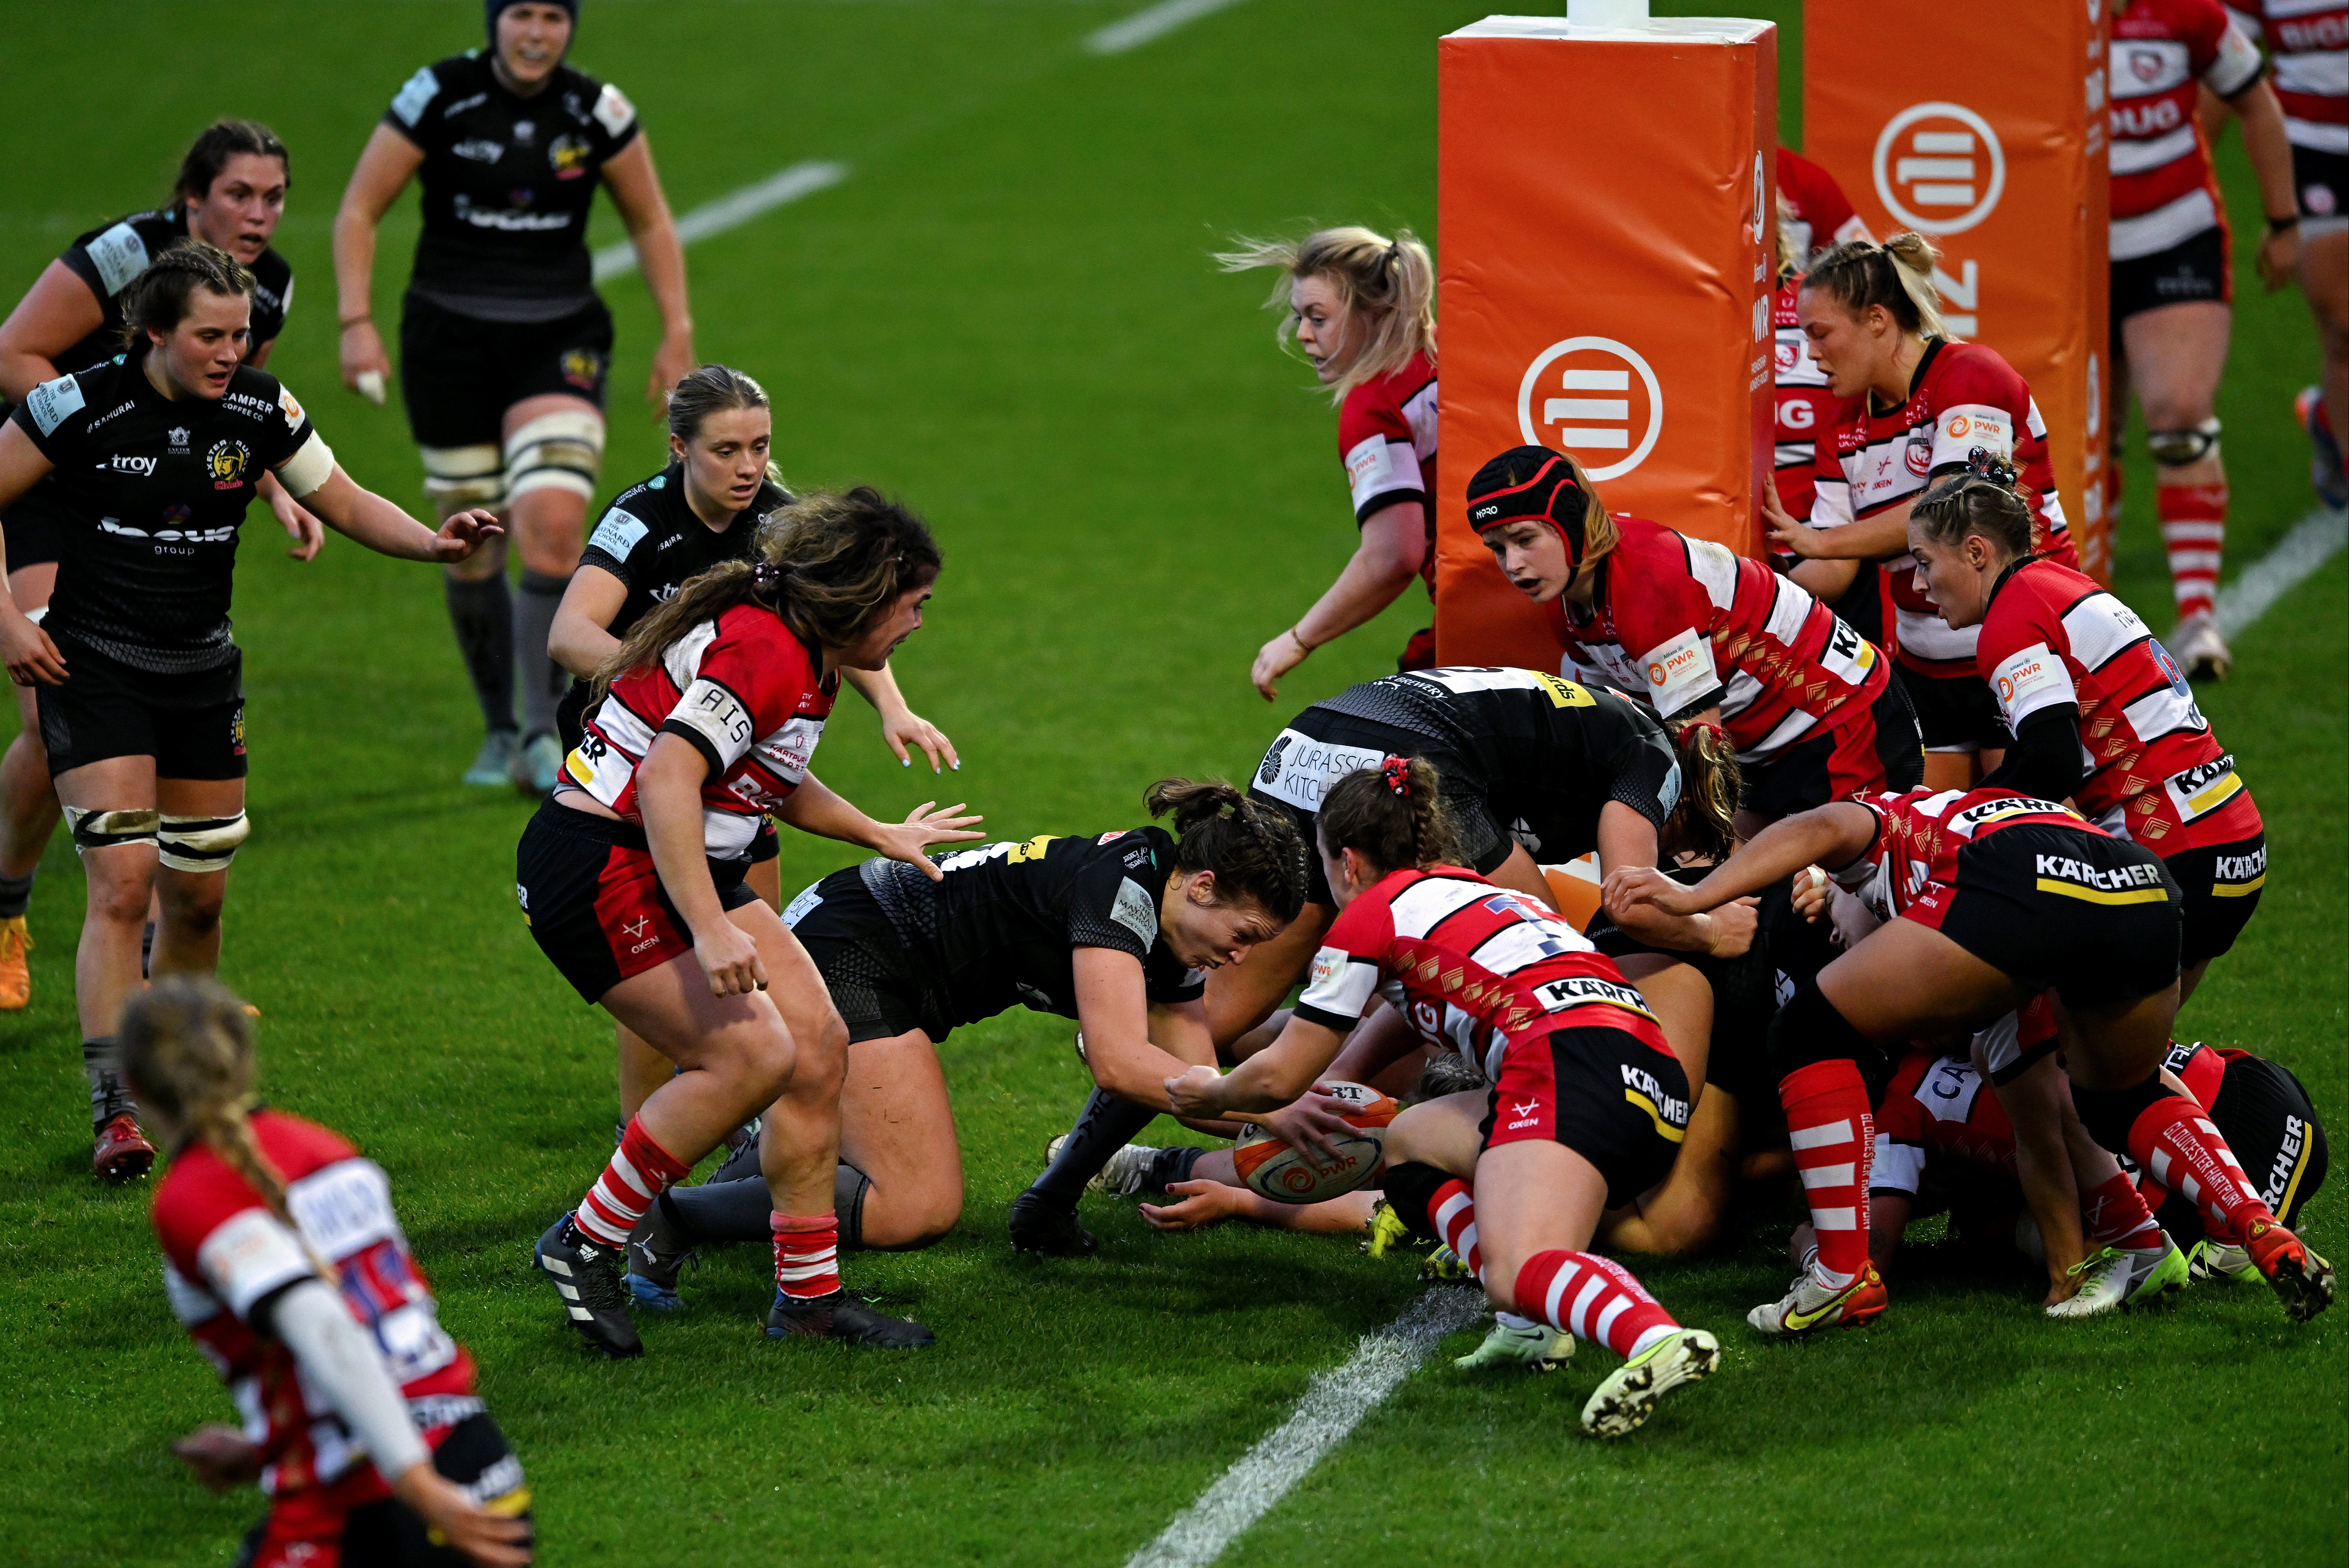 The RPA hopes to do more work within Premiership Women’s Rugby